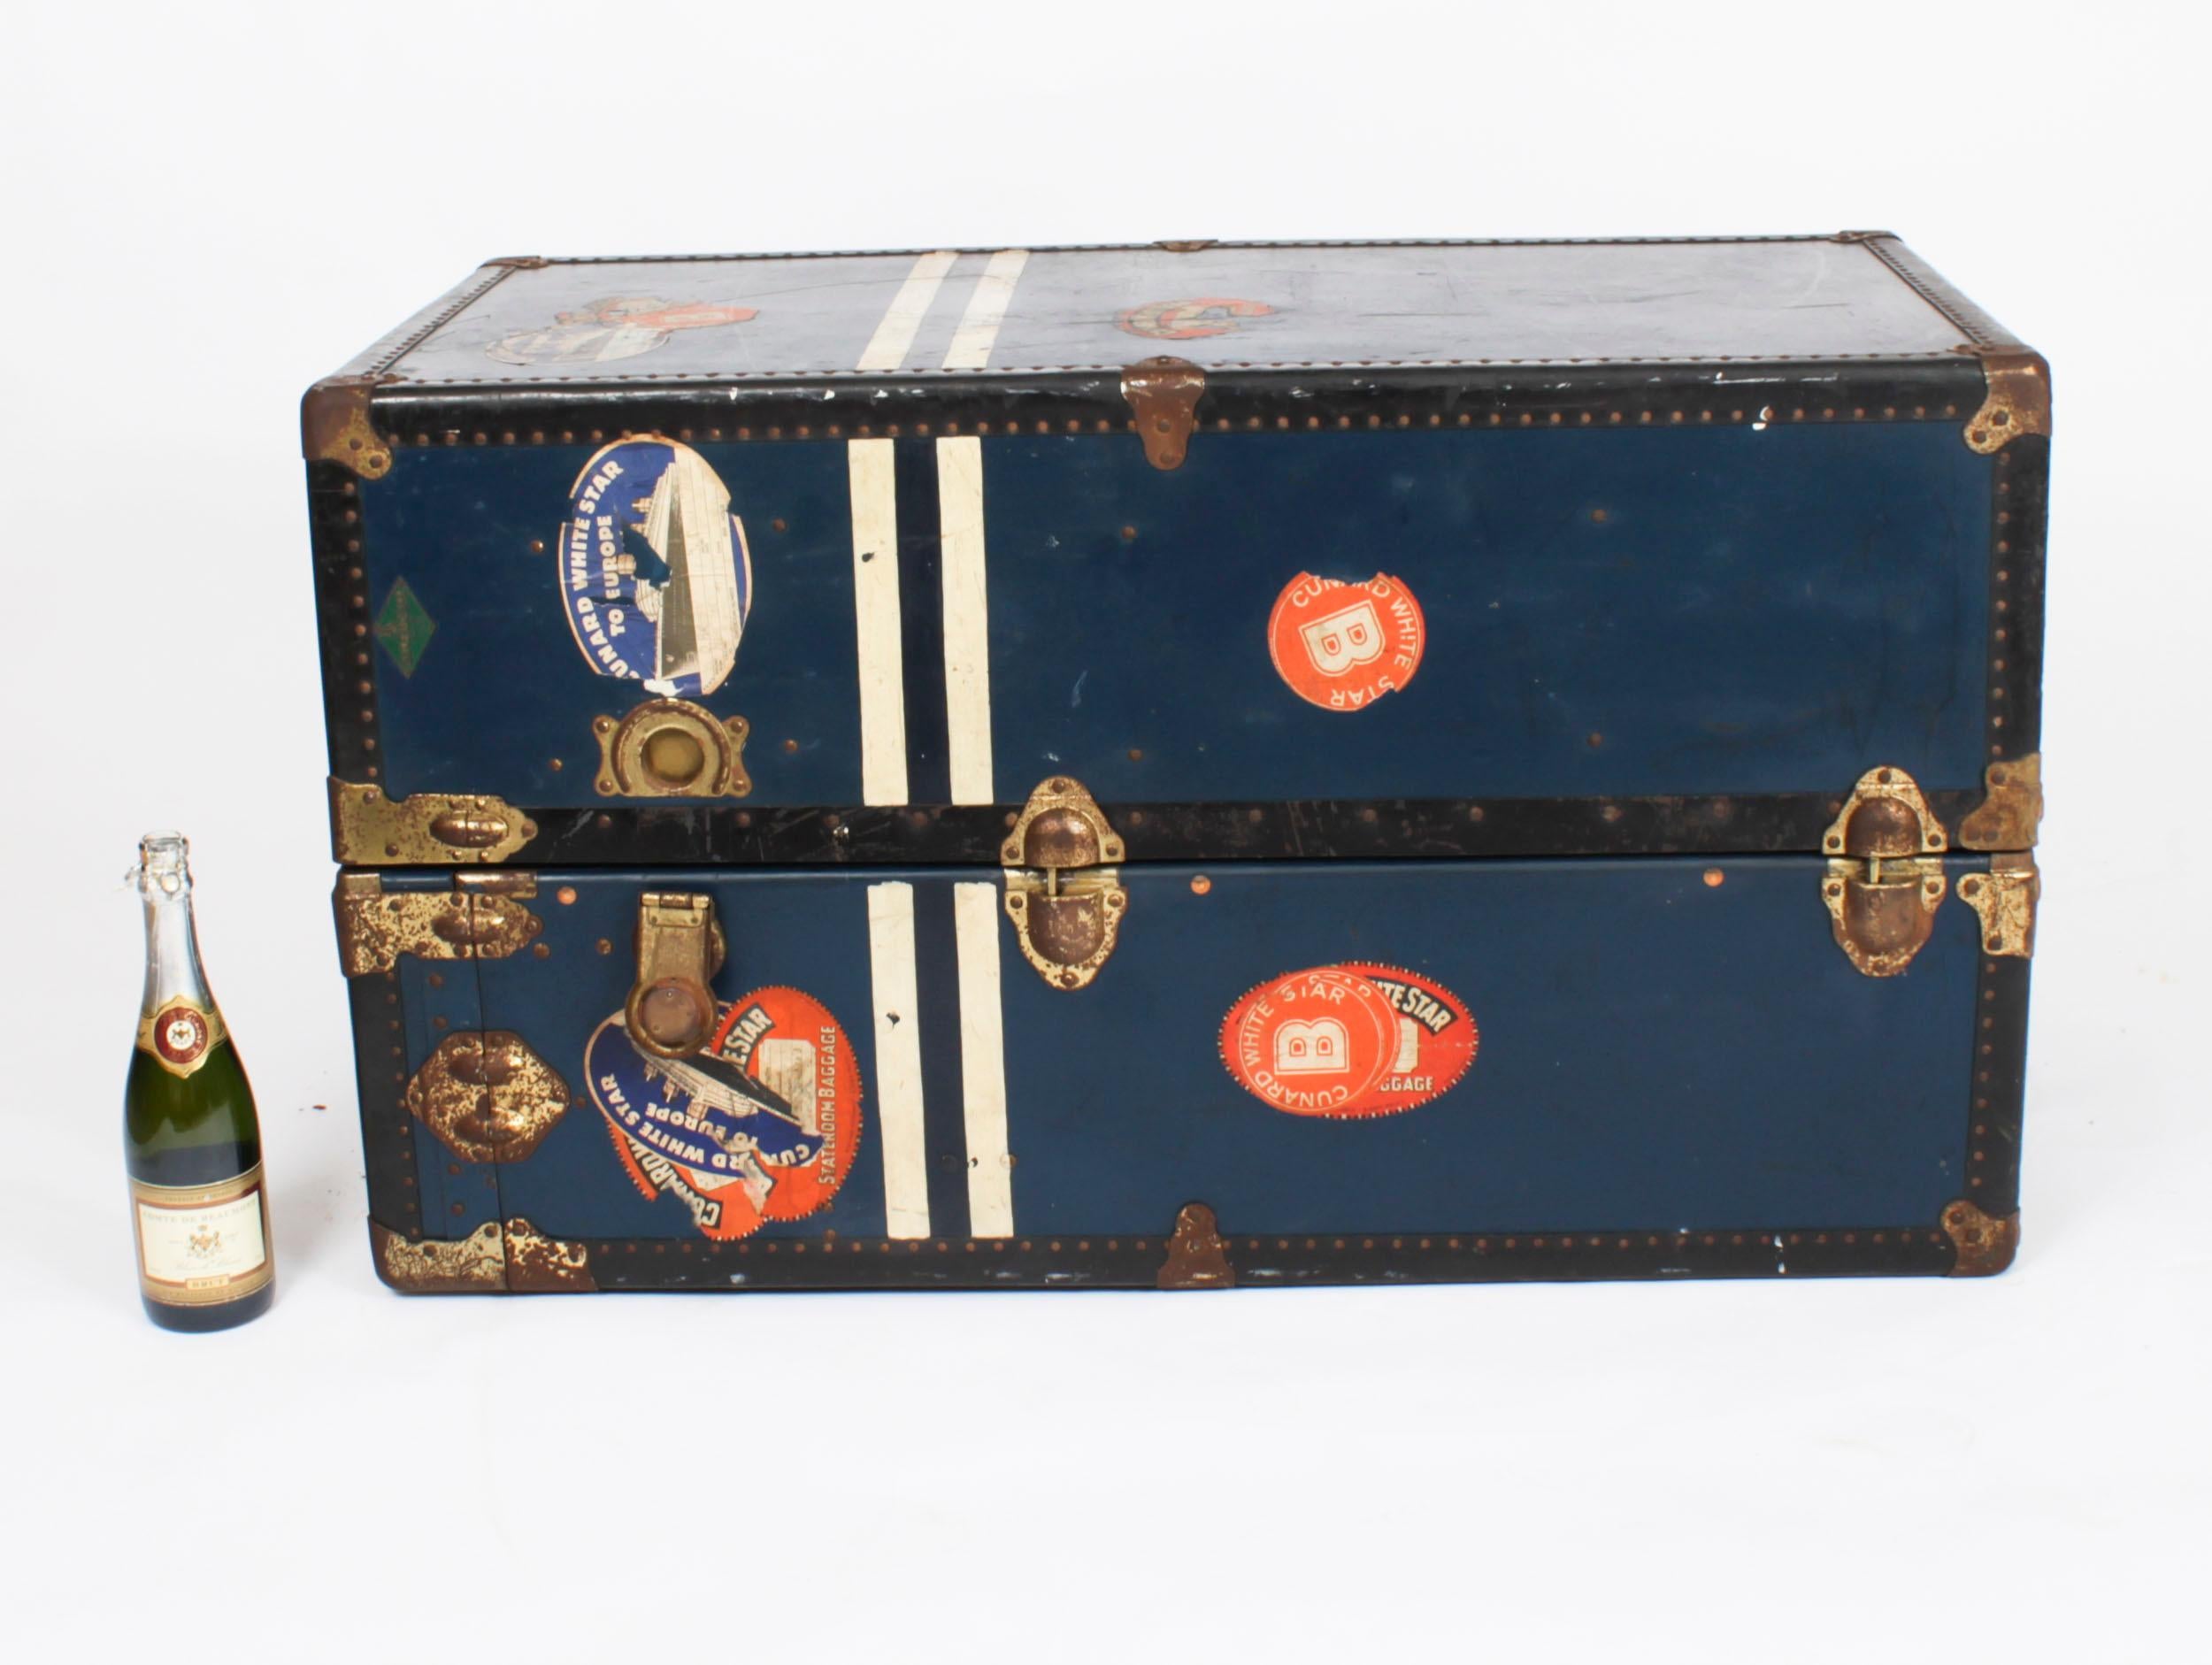 Antique Wardrobe Steamers Trunk Luggage C1930 For Sale 14